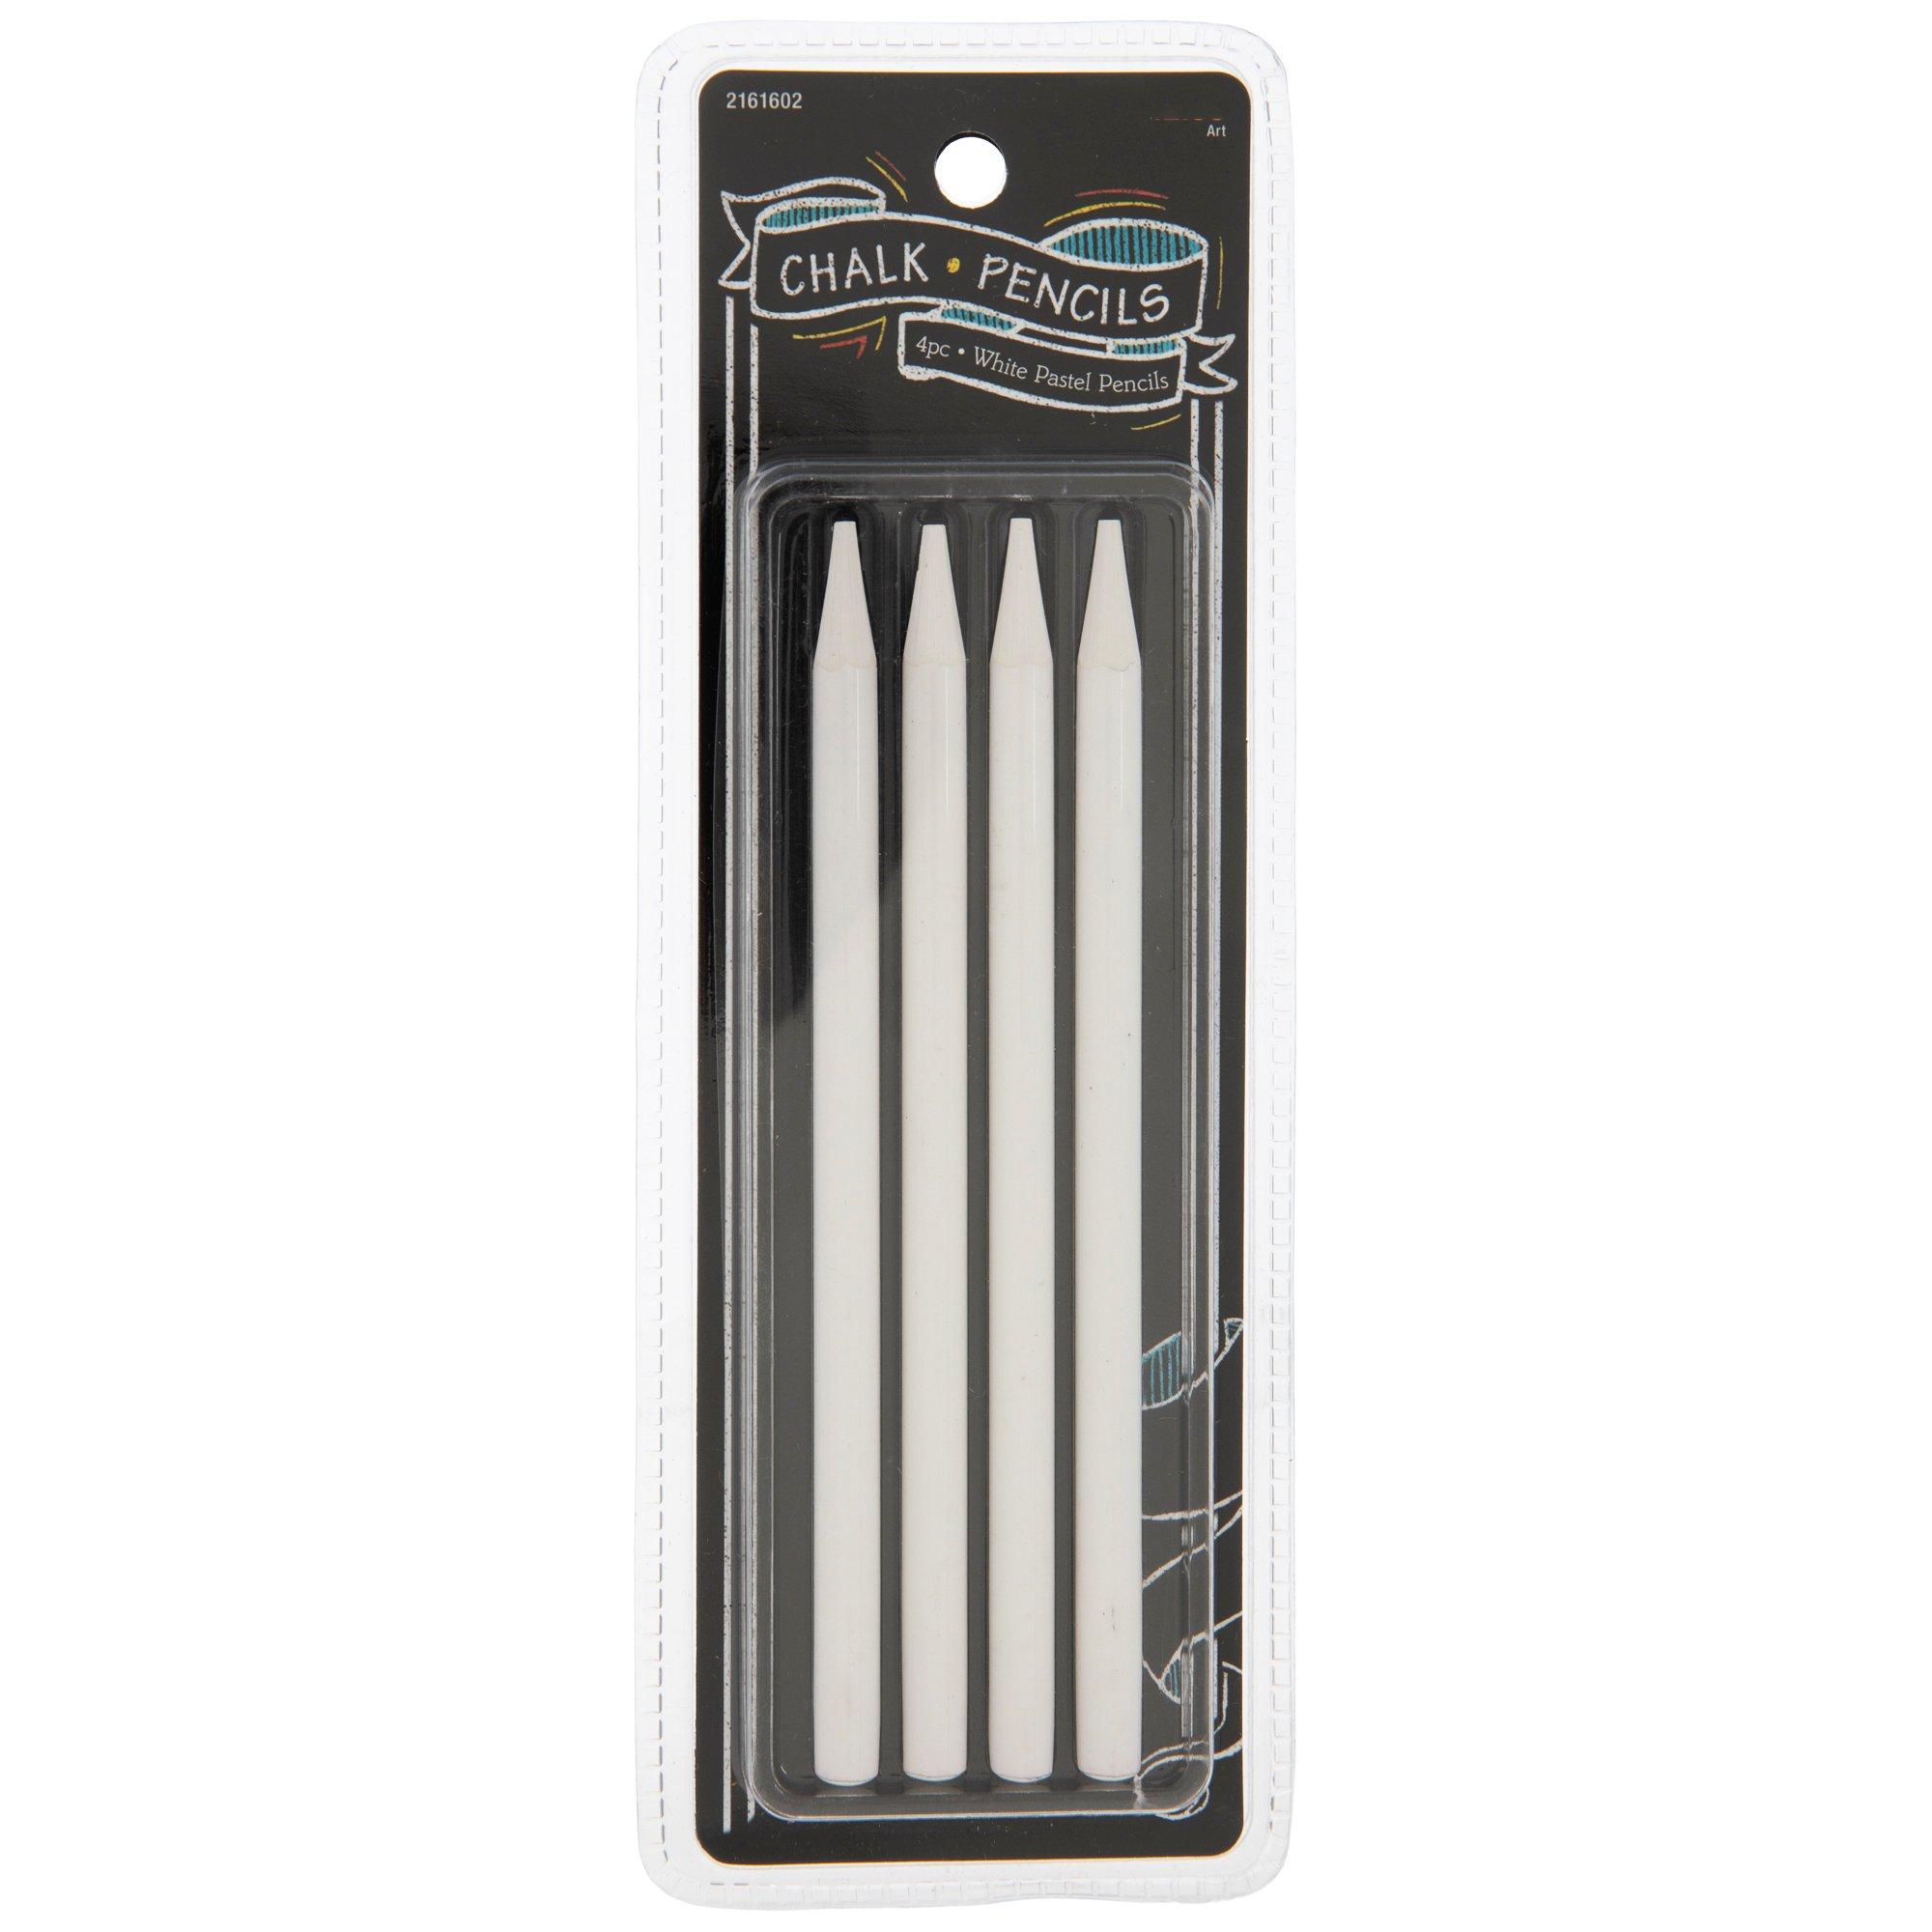 Master's Touch Woodless Charcoal Pencils - 6 Piece Set